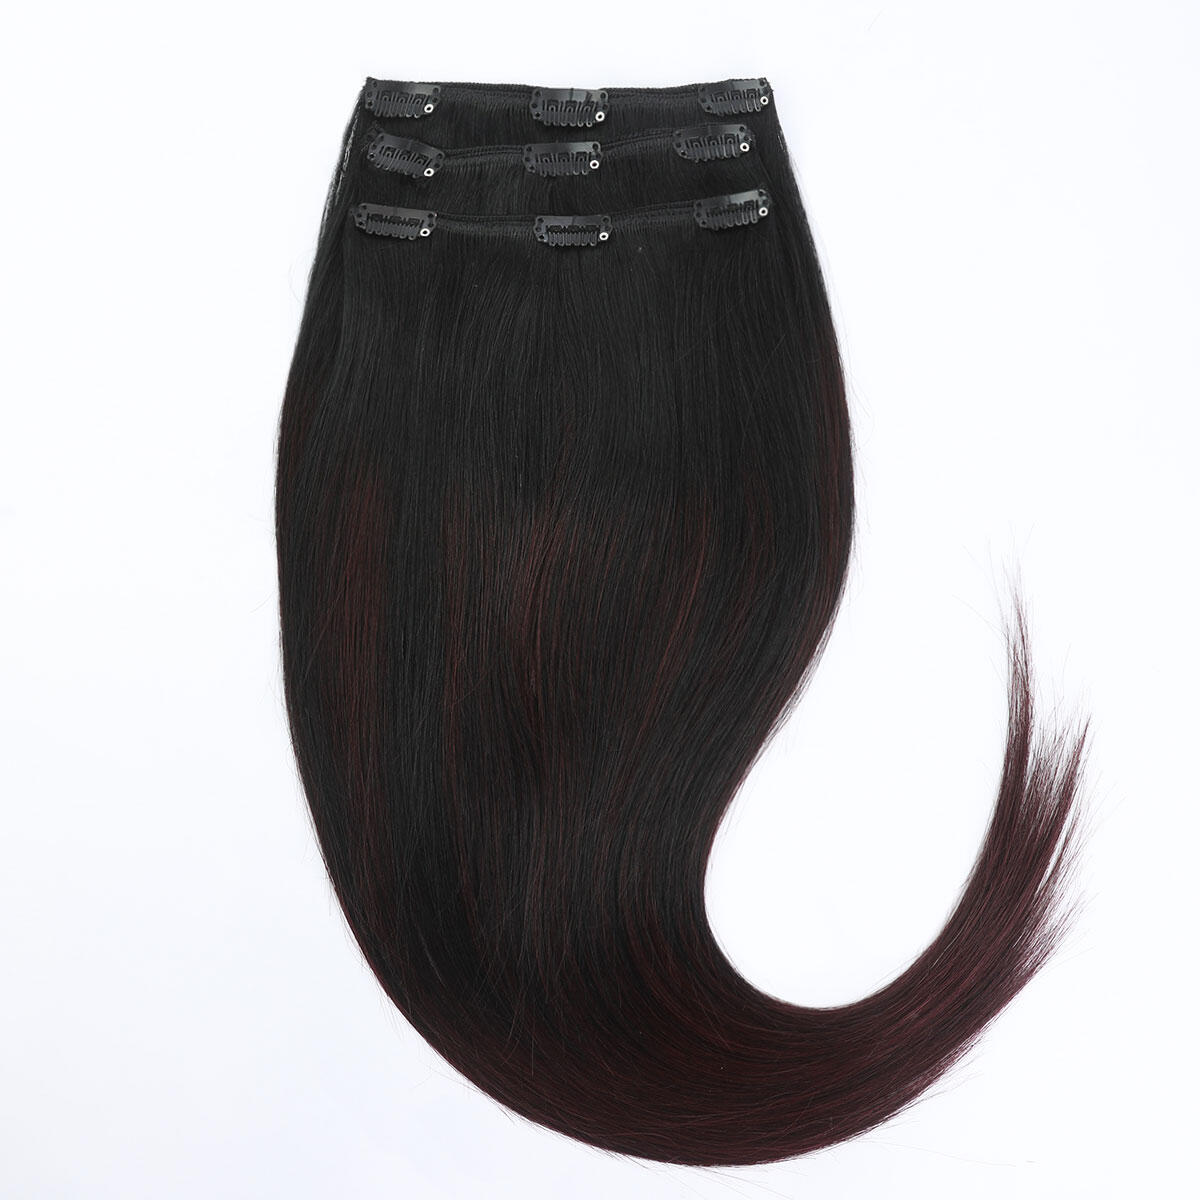 Clip-on set 3 pieces B1.0/6.12 Cherry Infused Black Balayage 40 cm